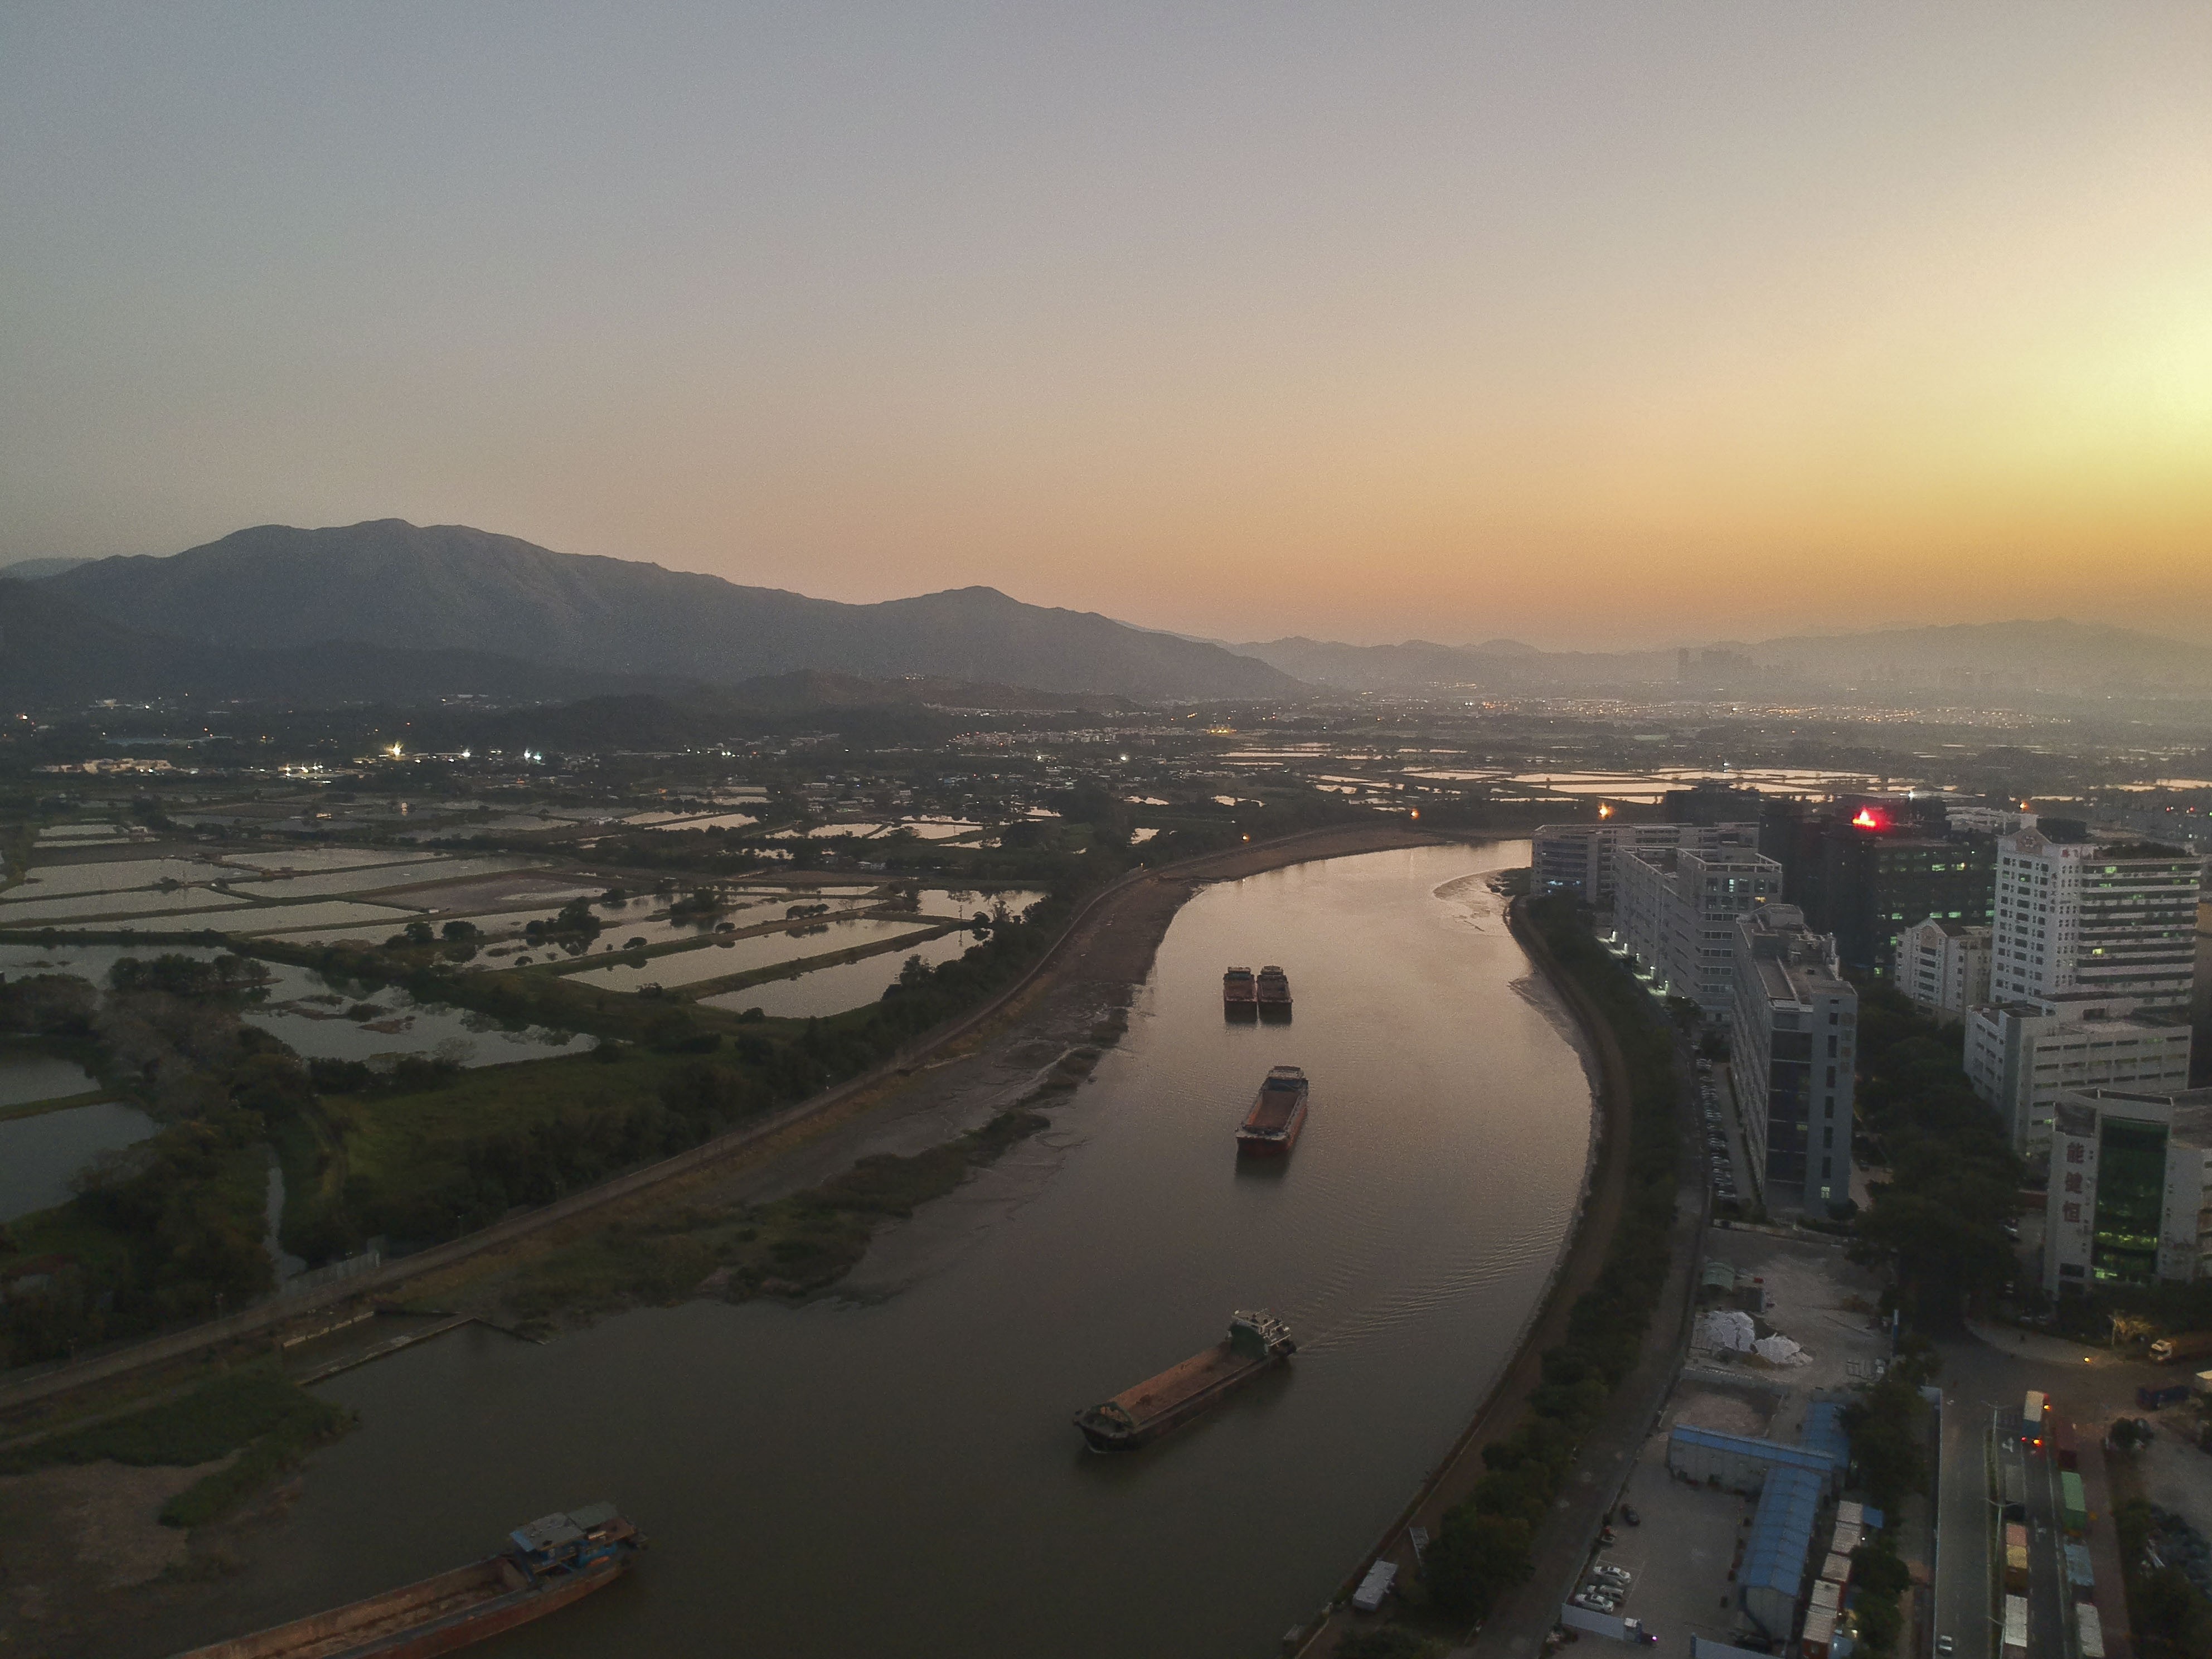 The wetlands in Lok Ma Chau, Hong Kong, and the Futian district in Shenzhen. When linked together, the Greater Bay Area will comprise 11 cities with 60 million people, and a combined economy estimated to be worth at least US$1.4 trillion. Photo: Roy Issa